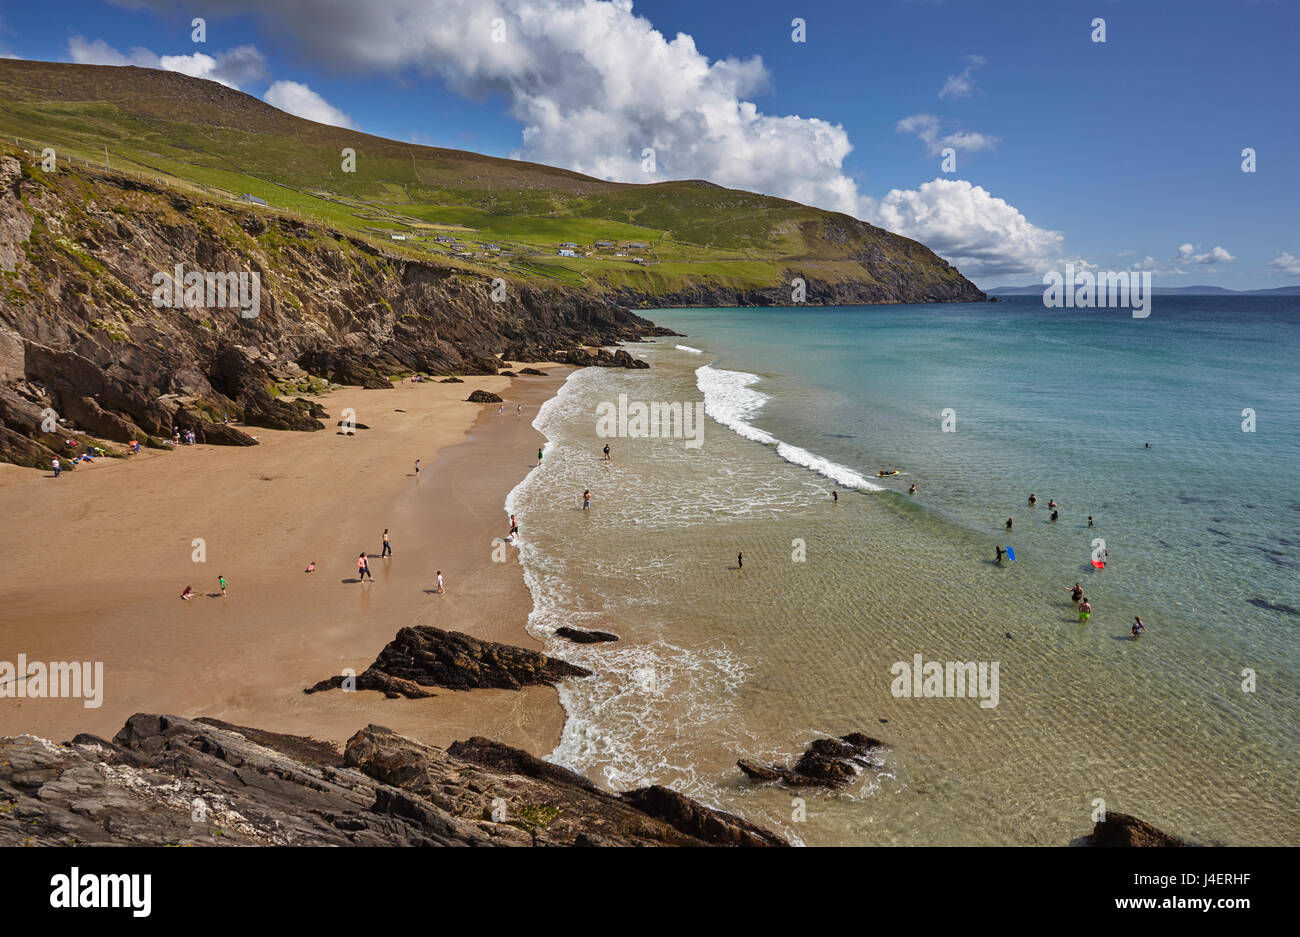 Beach on Dunmore Head, at the western end of the Dingle Peninsula, County Kerry, Munster, Republic of Ireland, Europe Stock Photo